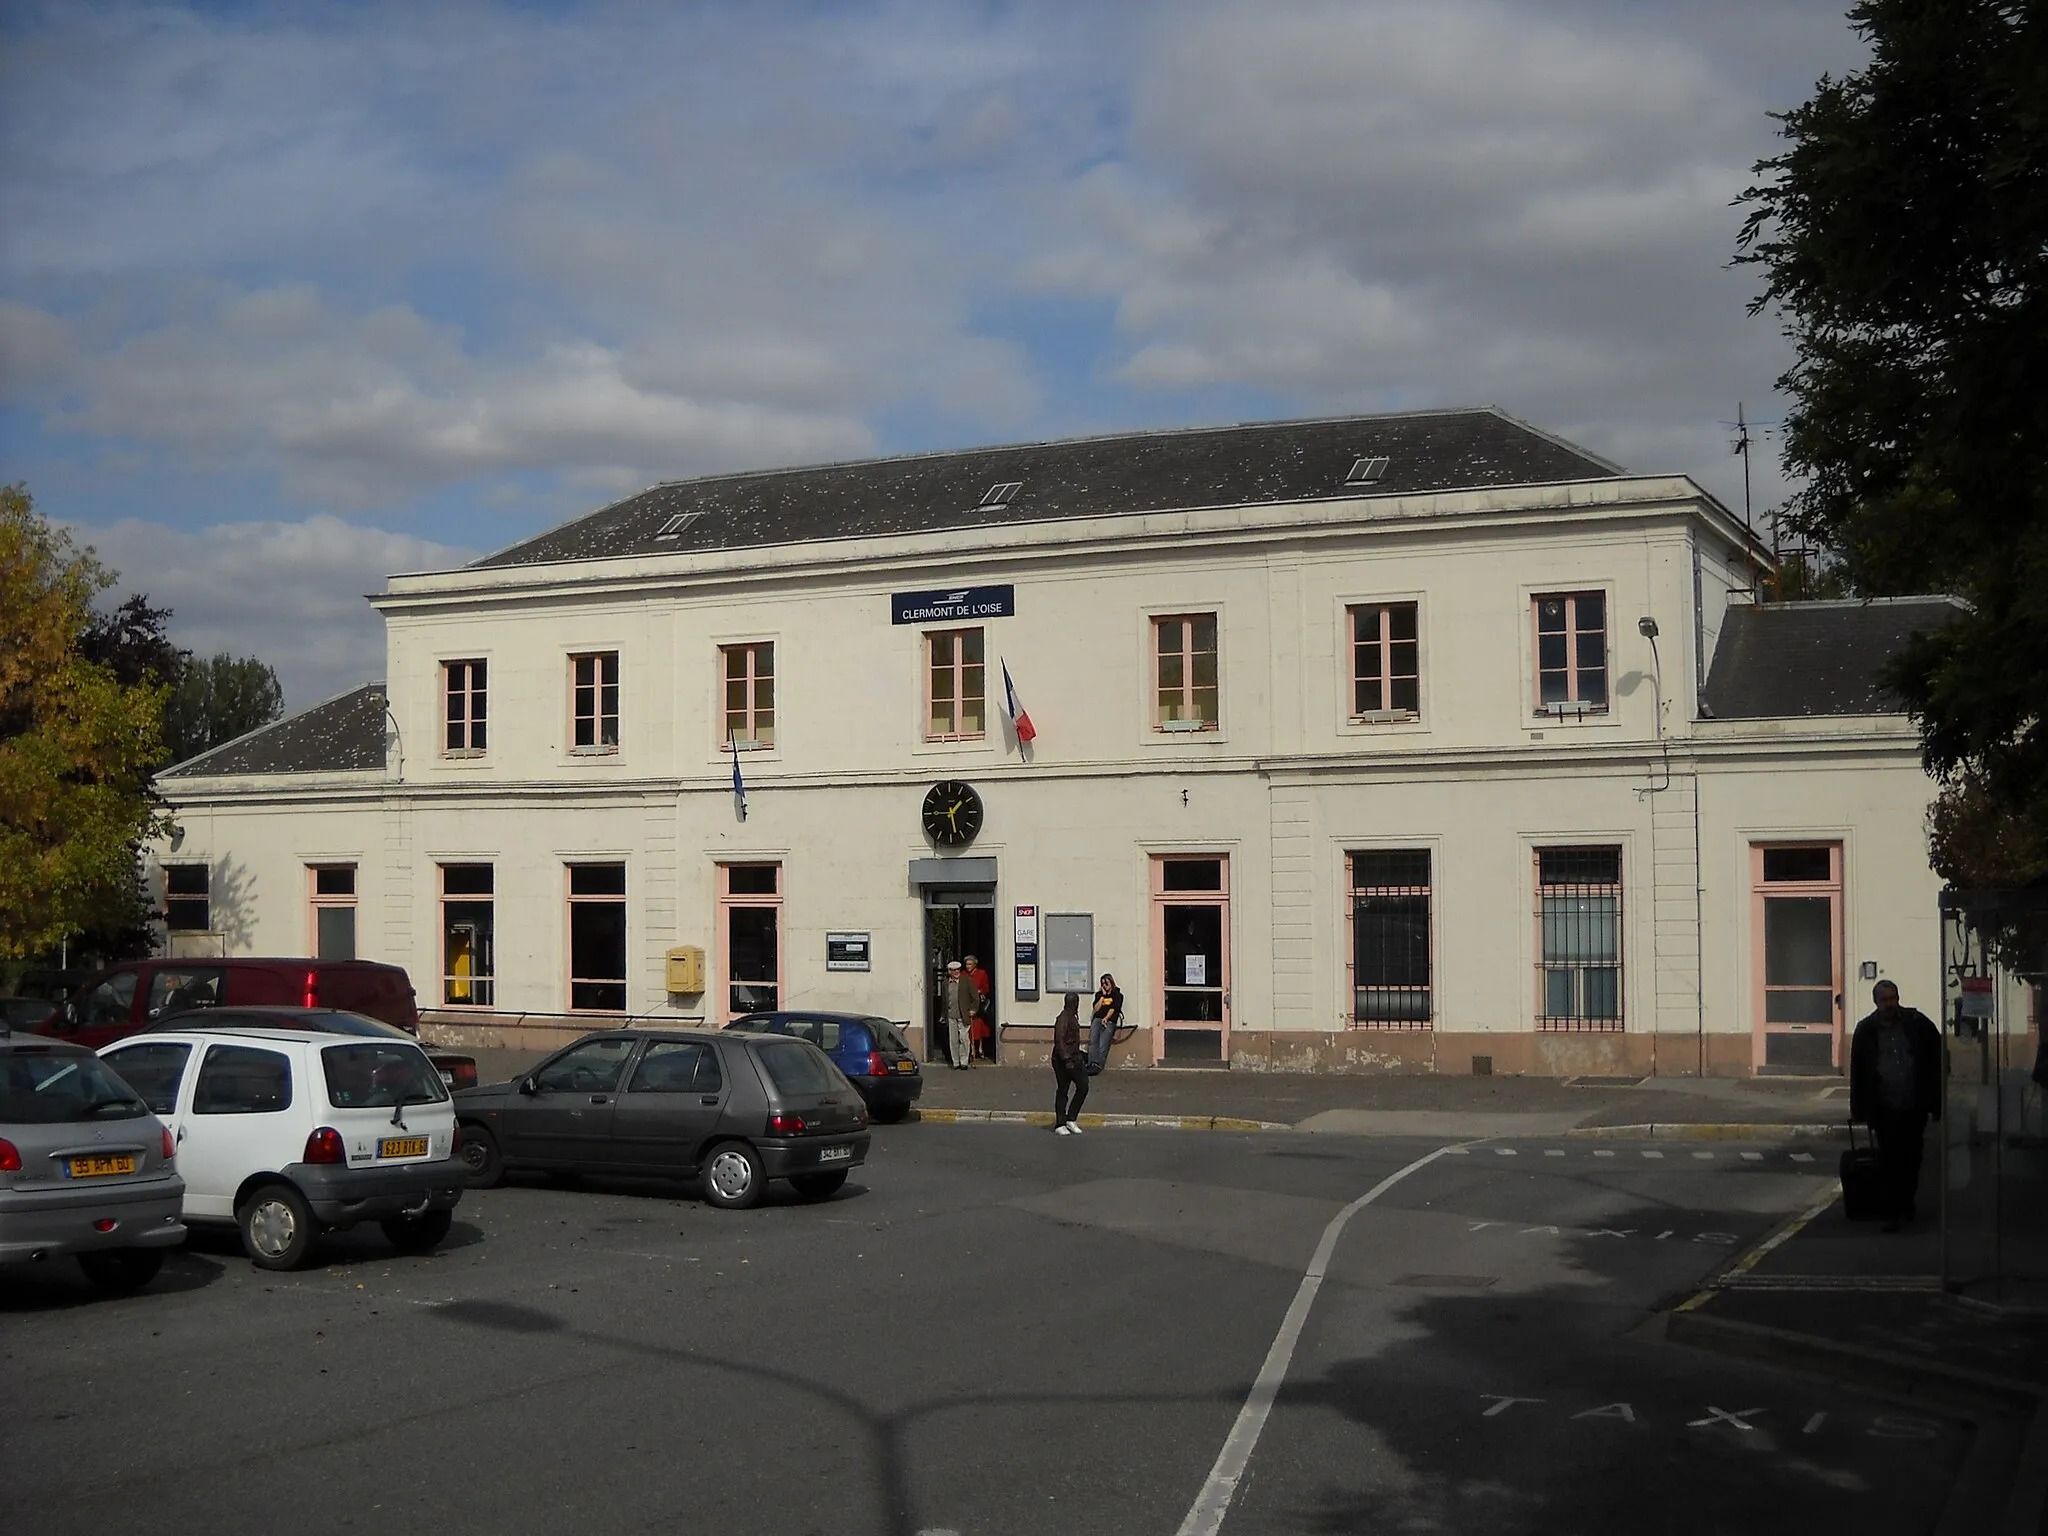 Photo showing: The train station of Clermont, Oise, France.